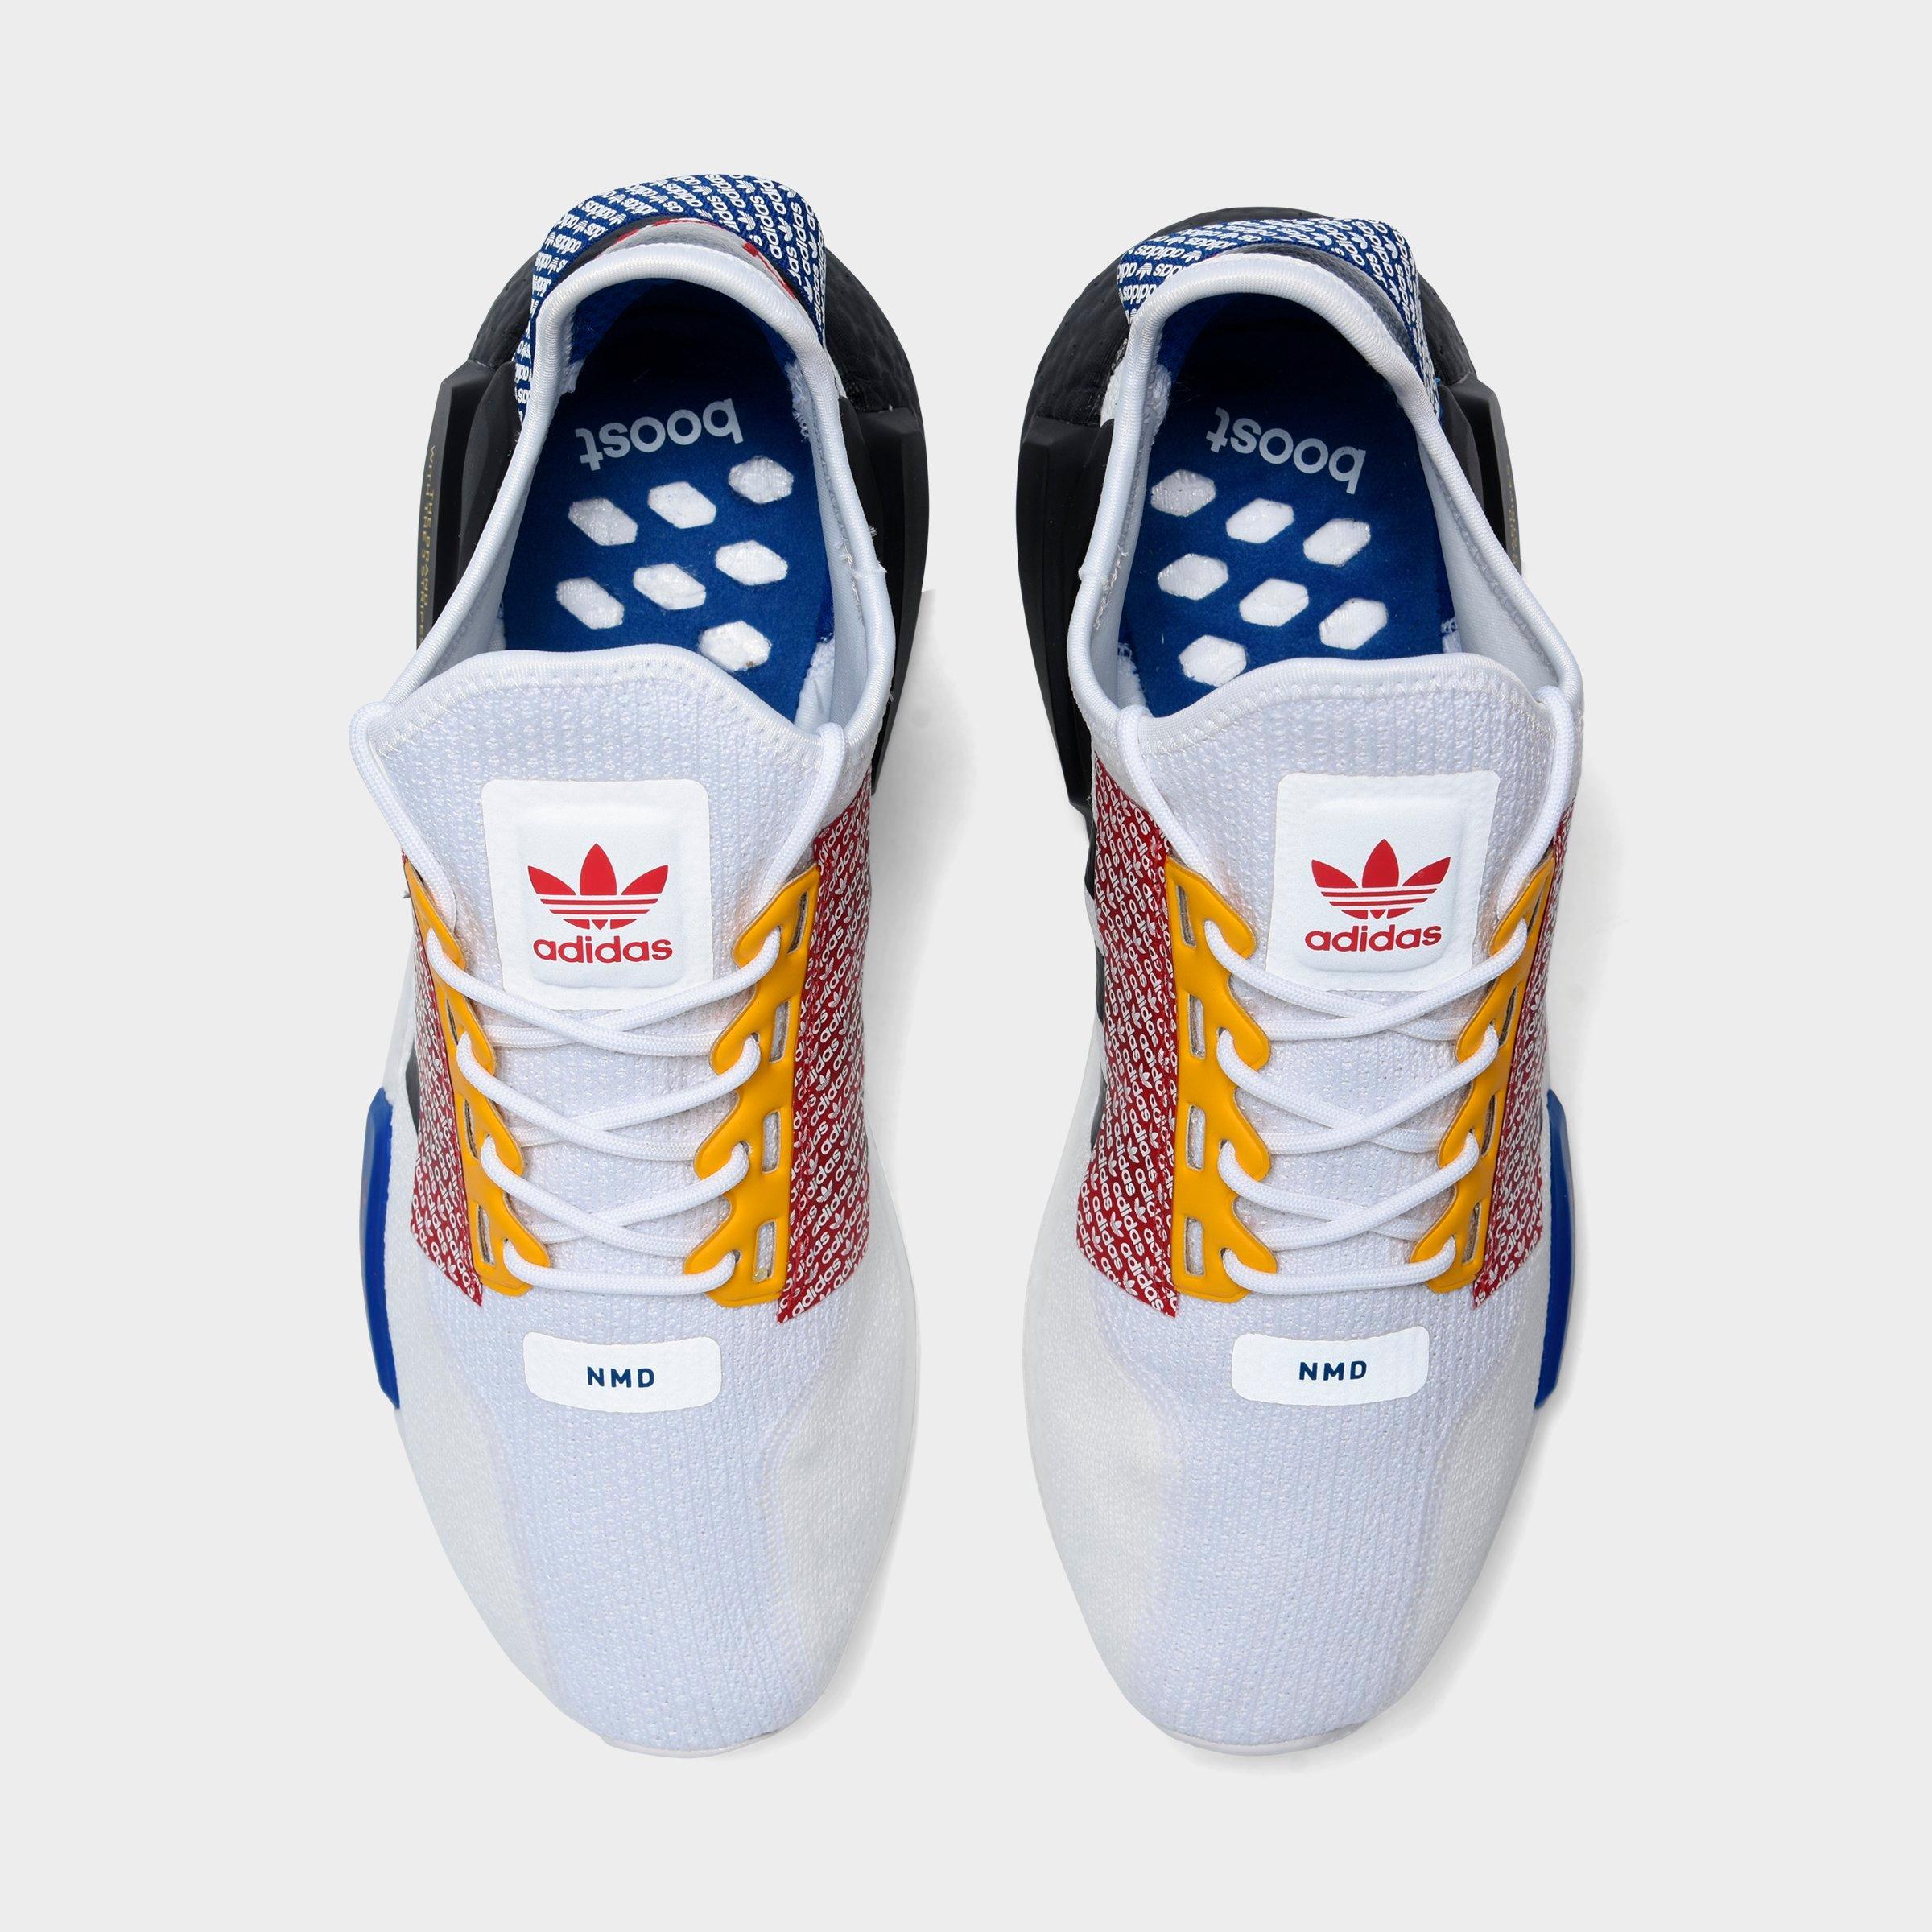 men's adidas nmd r1 casual shoes